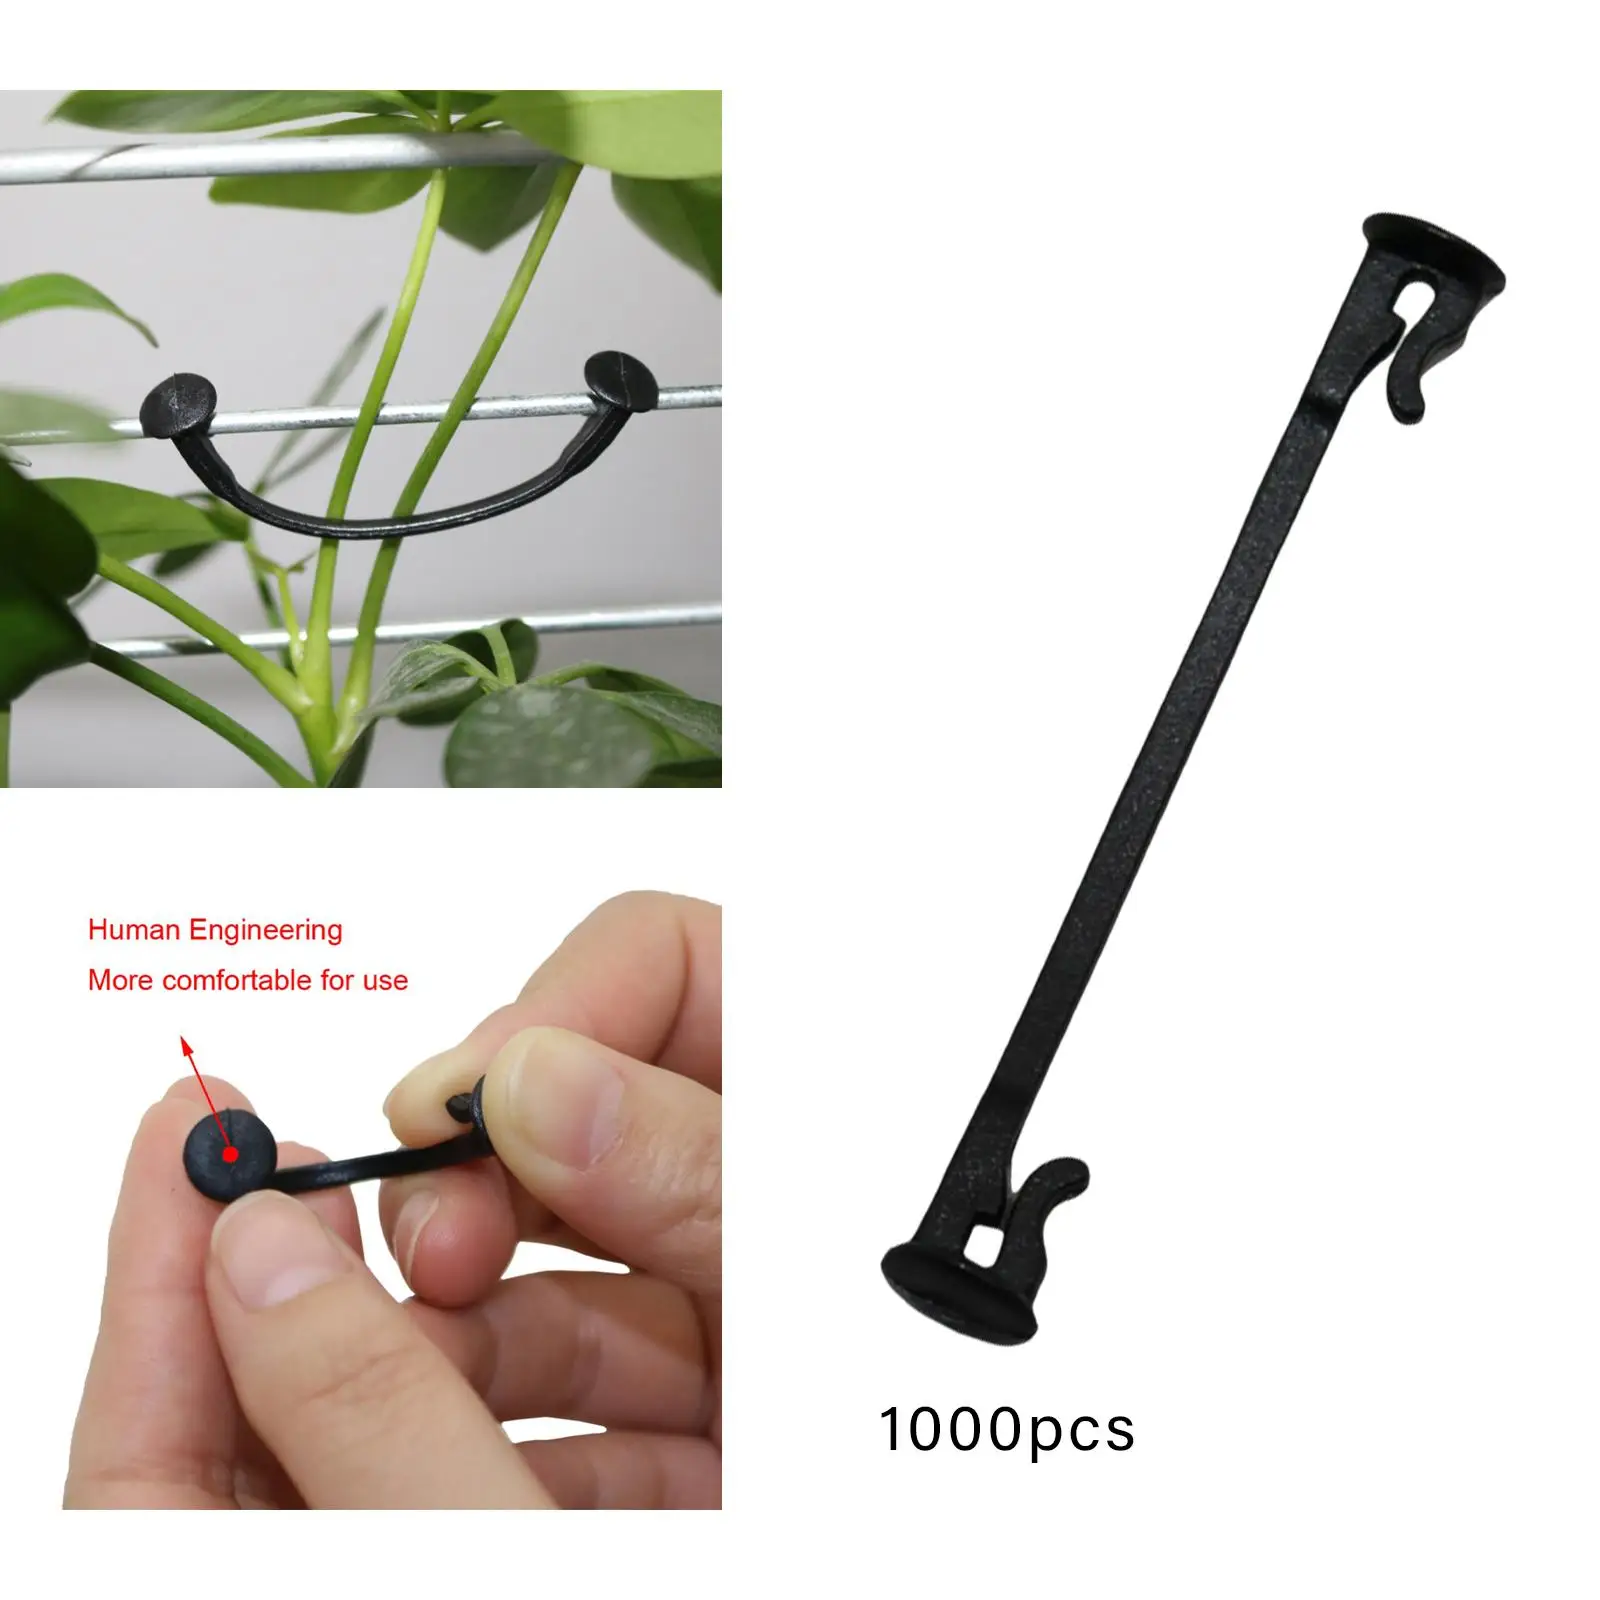 Plant Fixture Clips Gardening Supplies Plant Clips for Climbing for Flower Fruit Tree Nursery